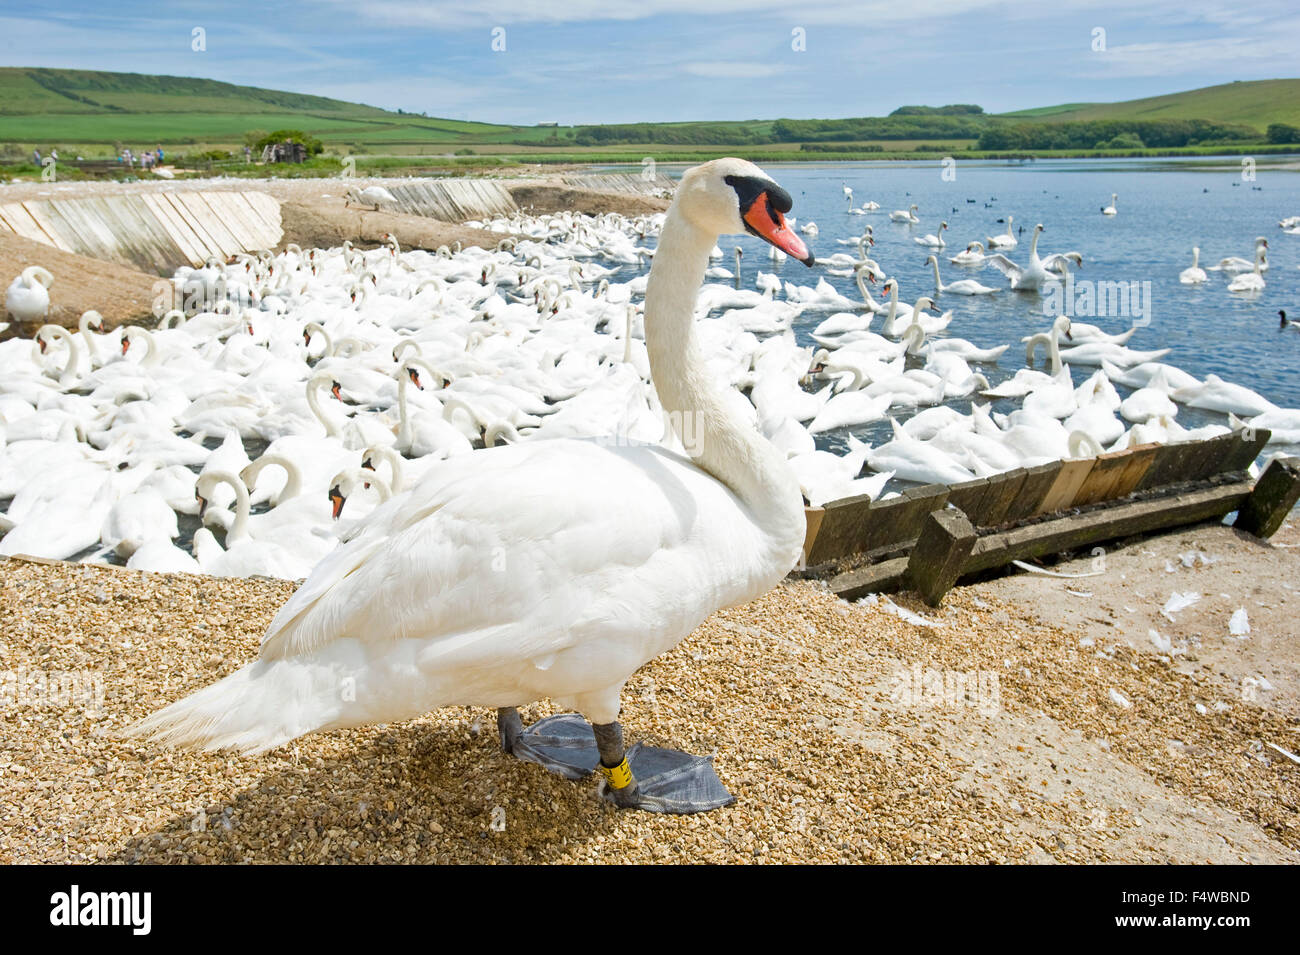 An image showing one of the swans on land in the foreground at the Abbotsbury swan sanctuary in Dorset. Stock Photo